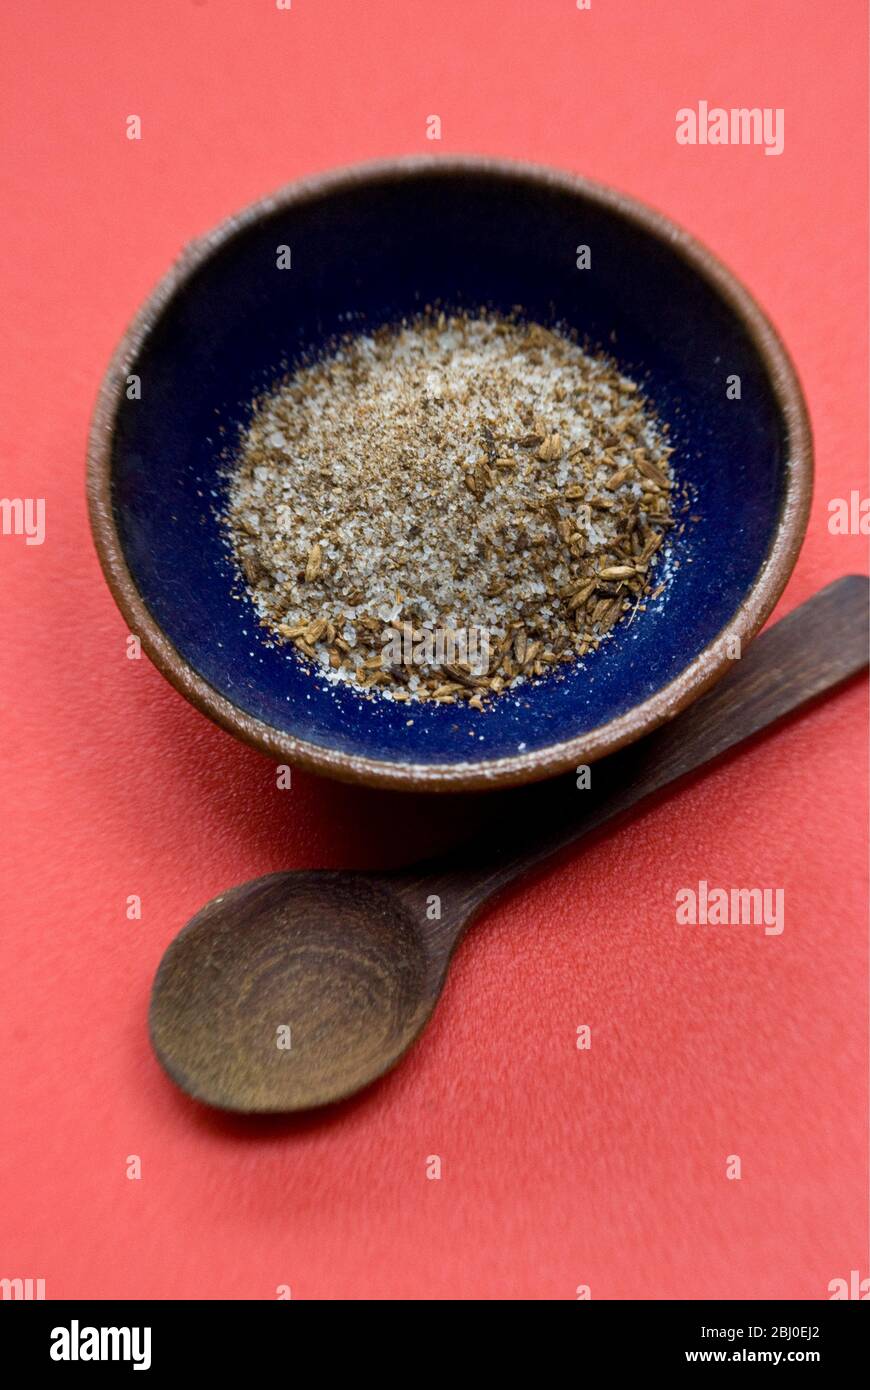 A mixture of sea salt and toasted, crushed cumin seeds, a popular seasoning for Morrocan food. - Stock Photo